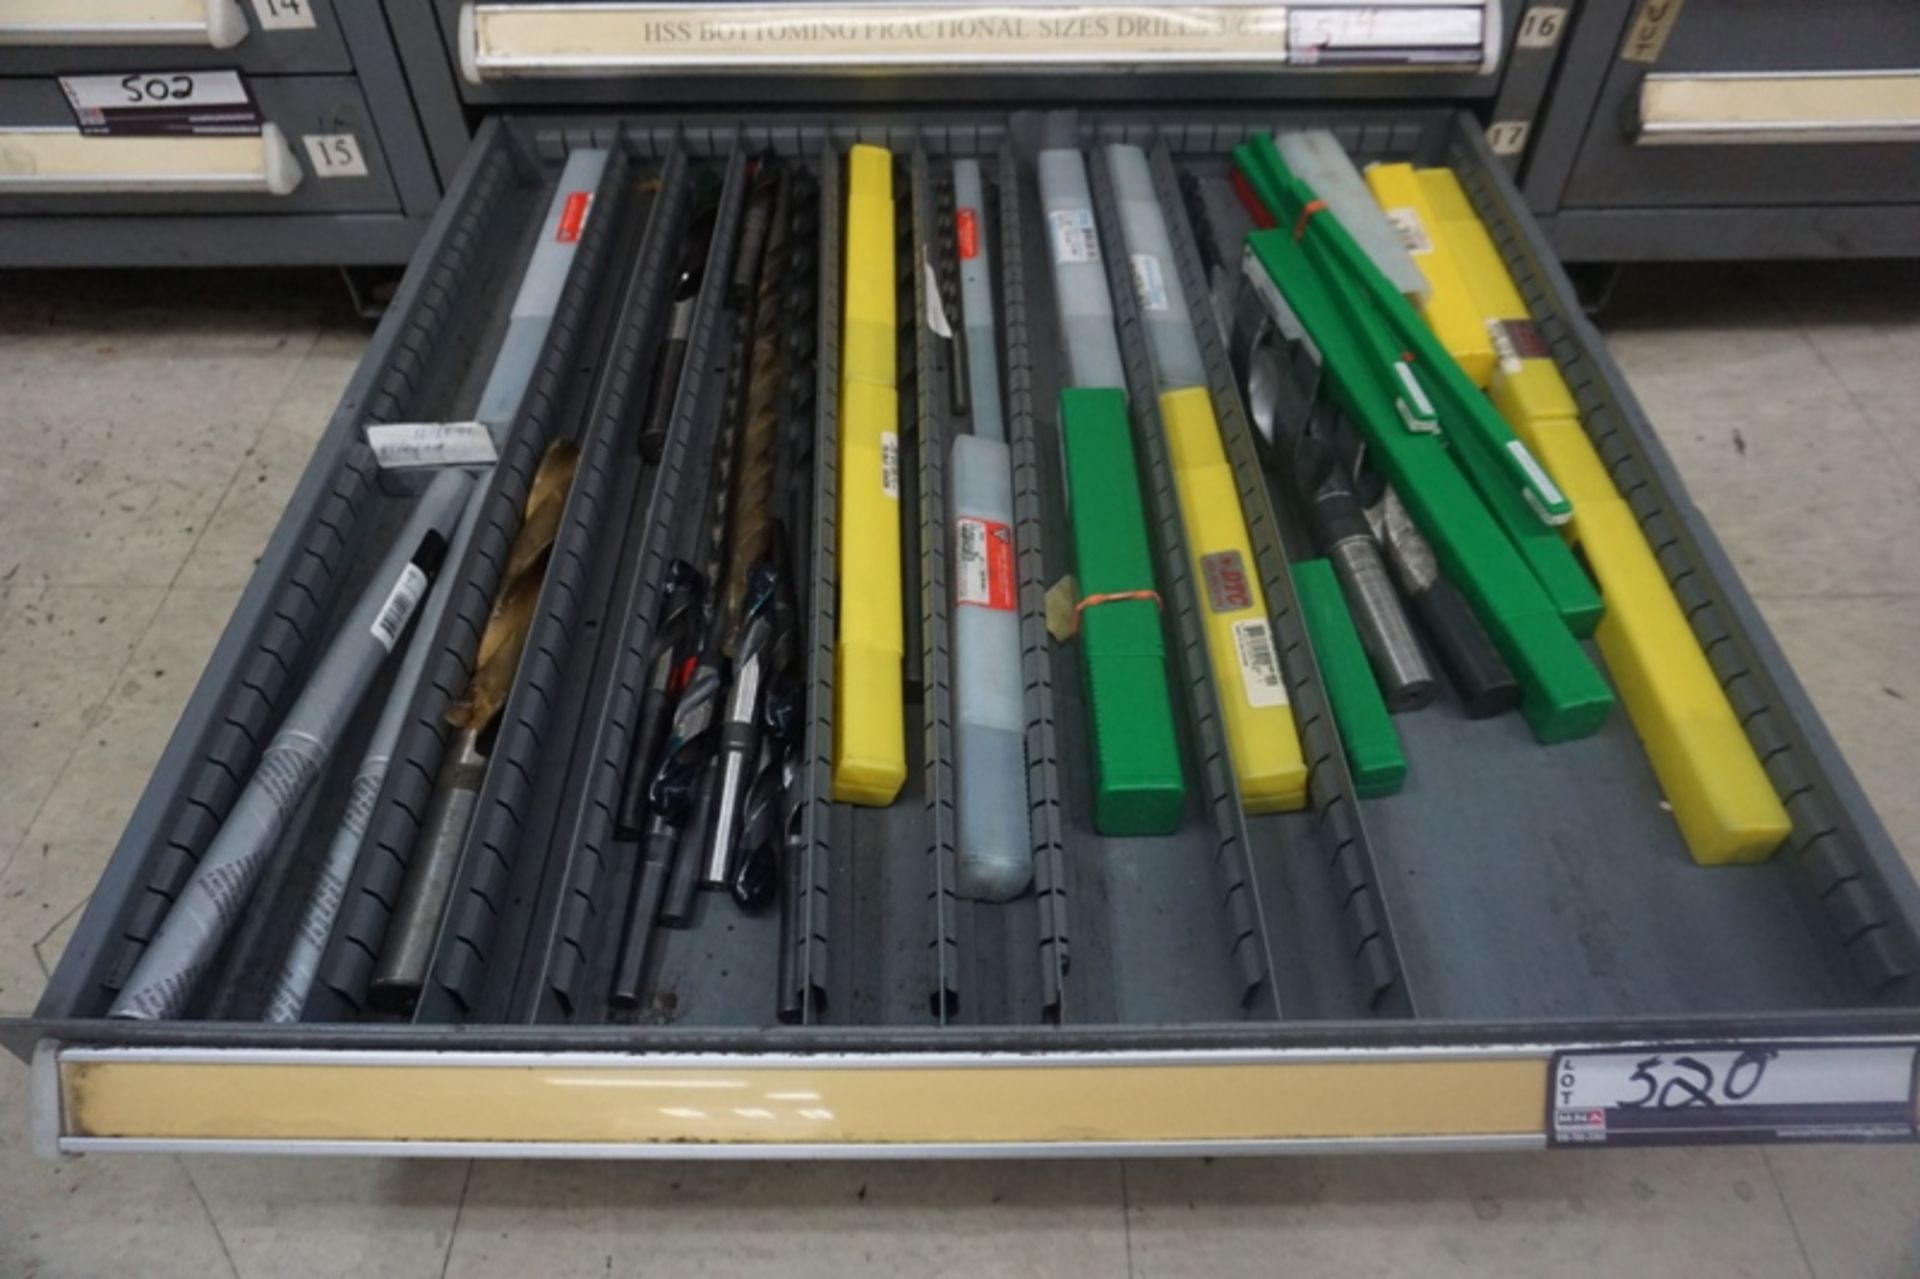 Drawer with Assorted High Speed Drills - Image 2 of 7